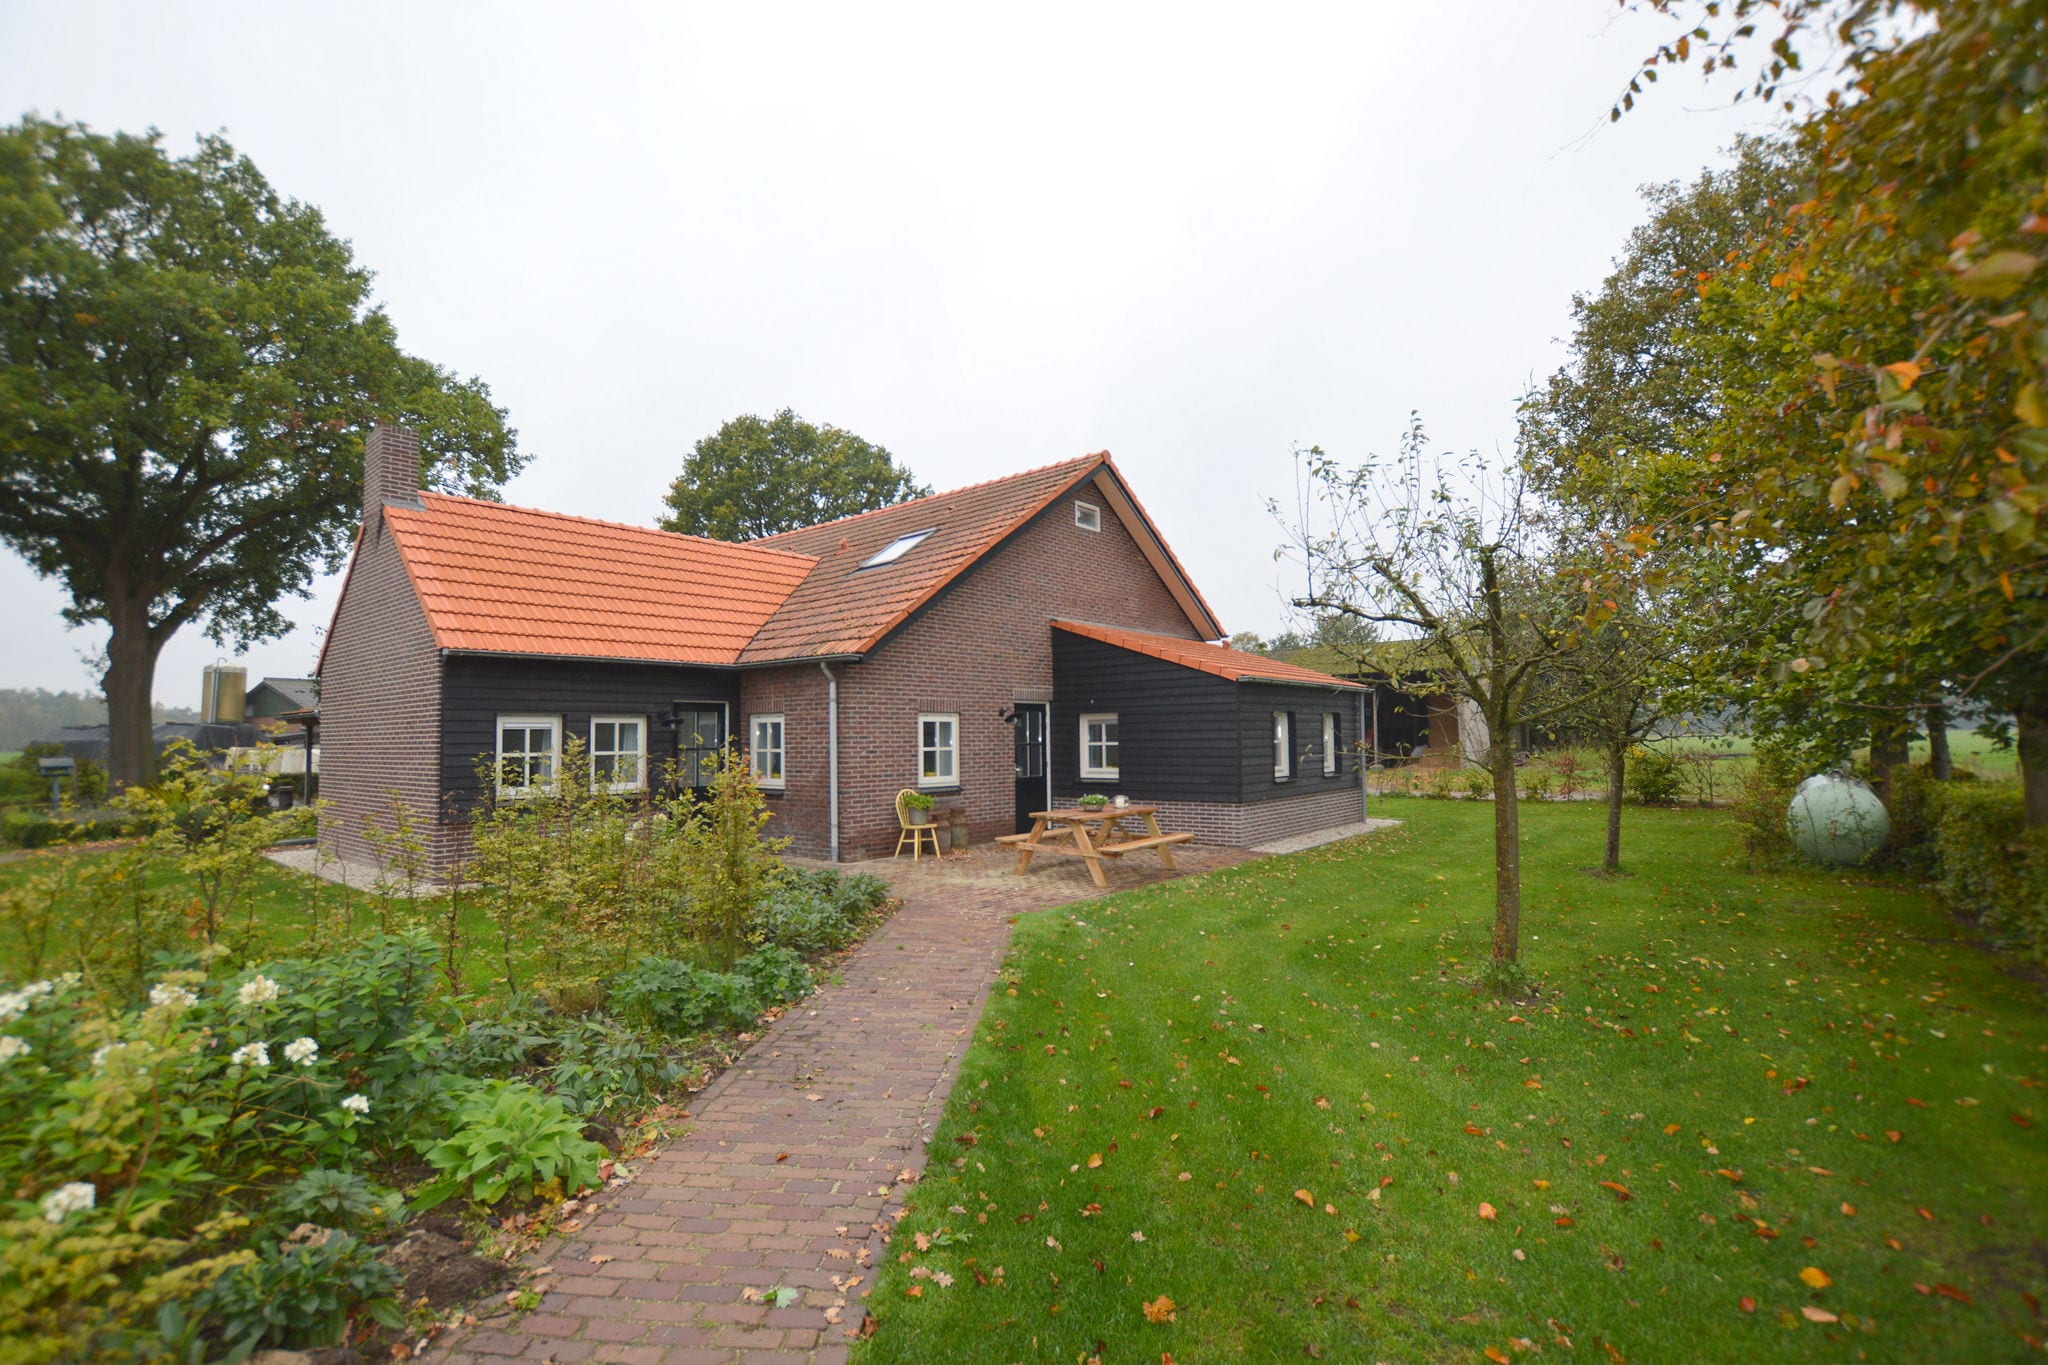 Cosy holiday home on a farm in Zeeland